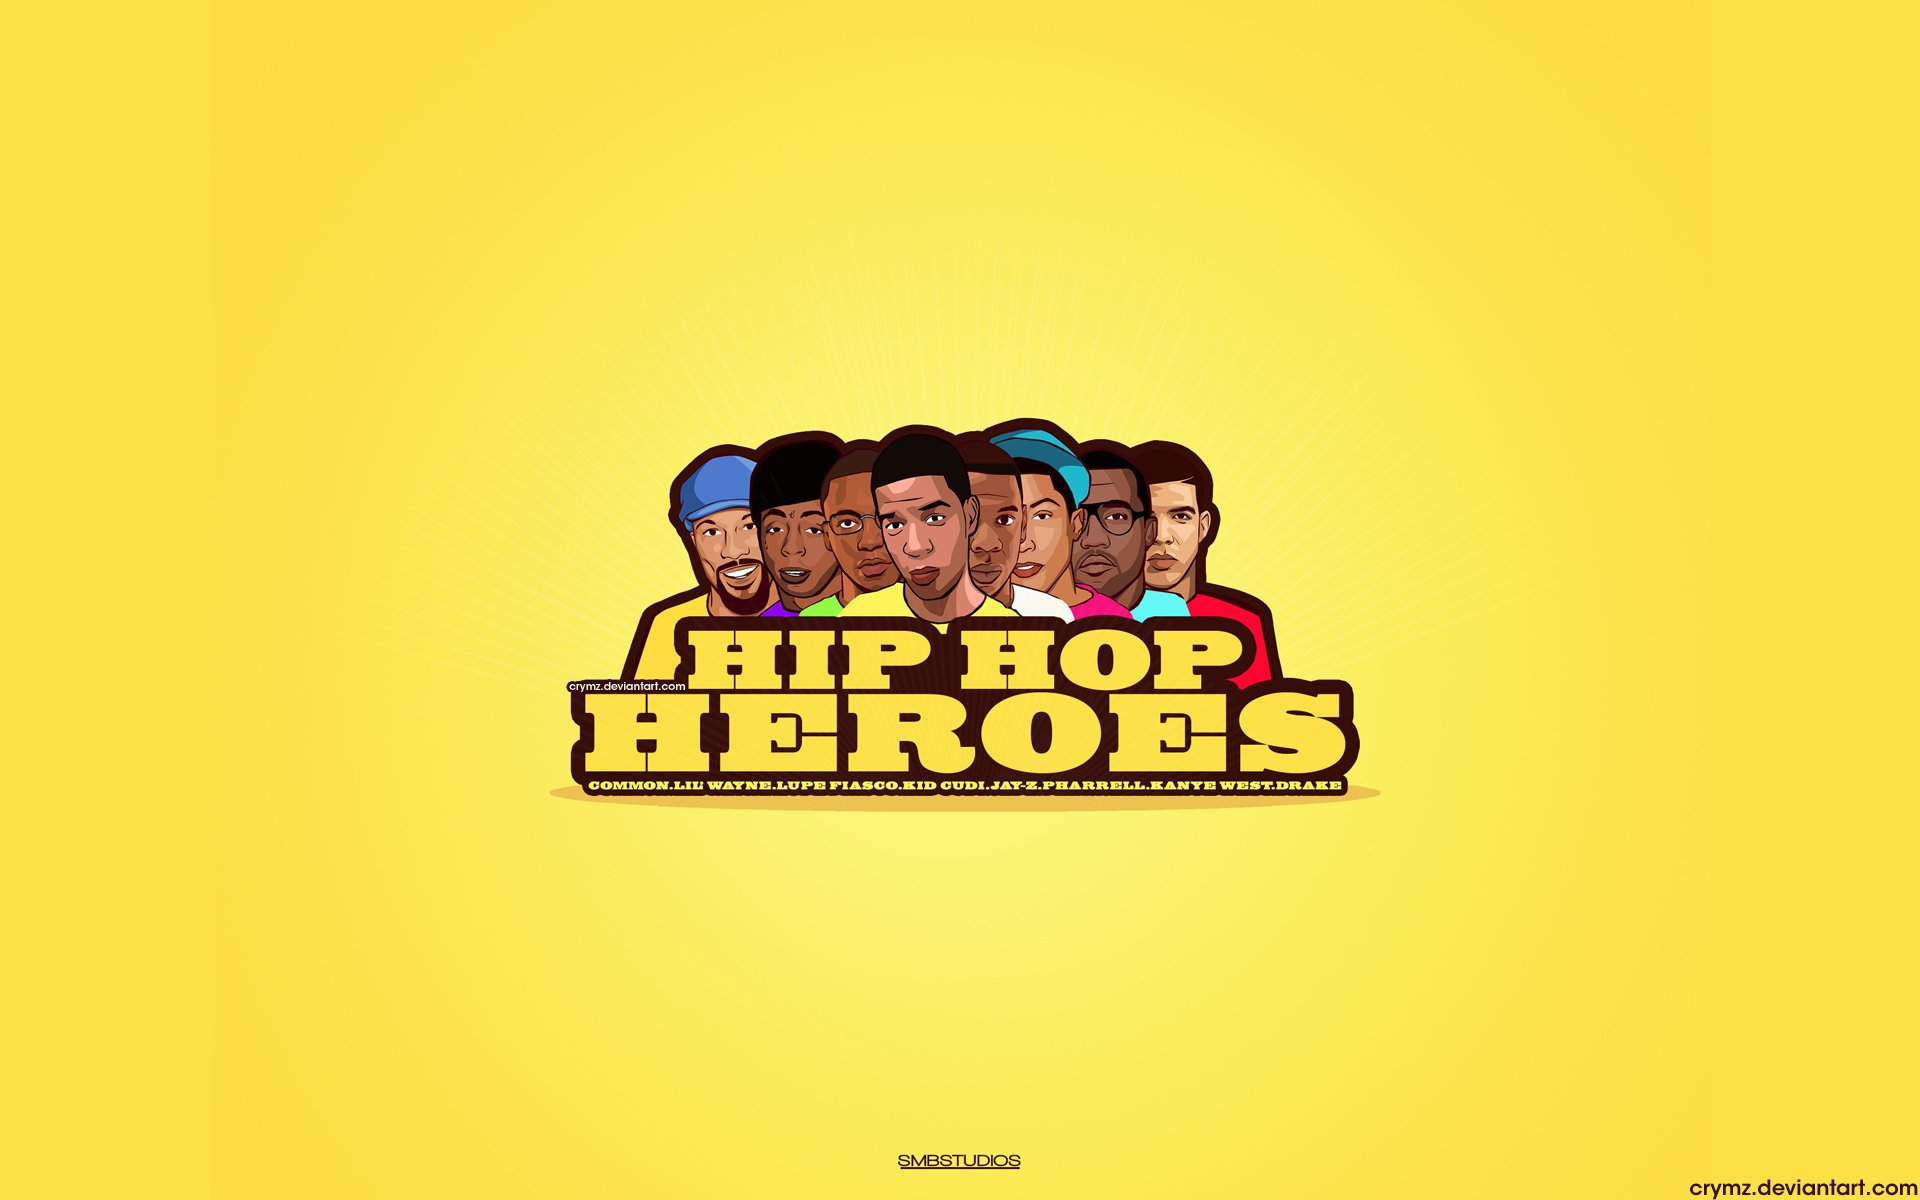 HIP HOP HEROES LOGO Wallpaper by crymz on